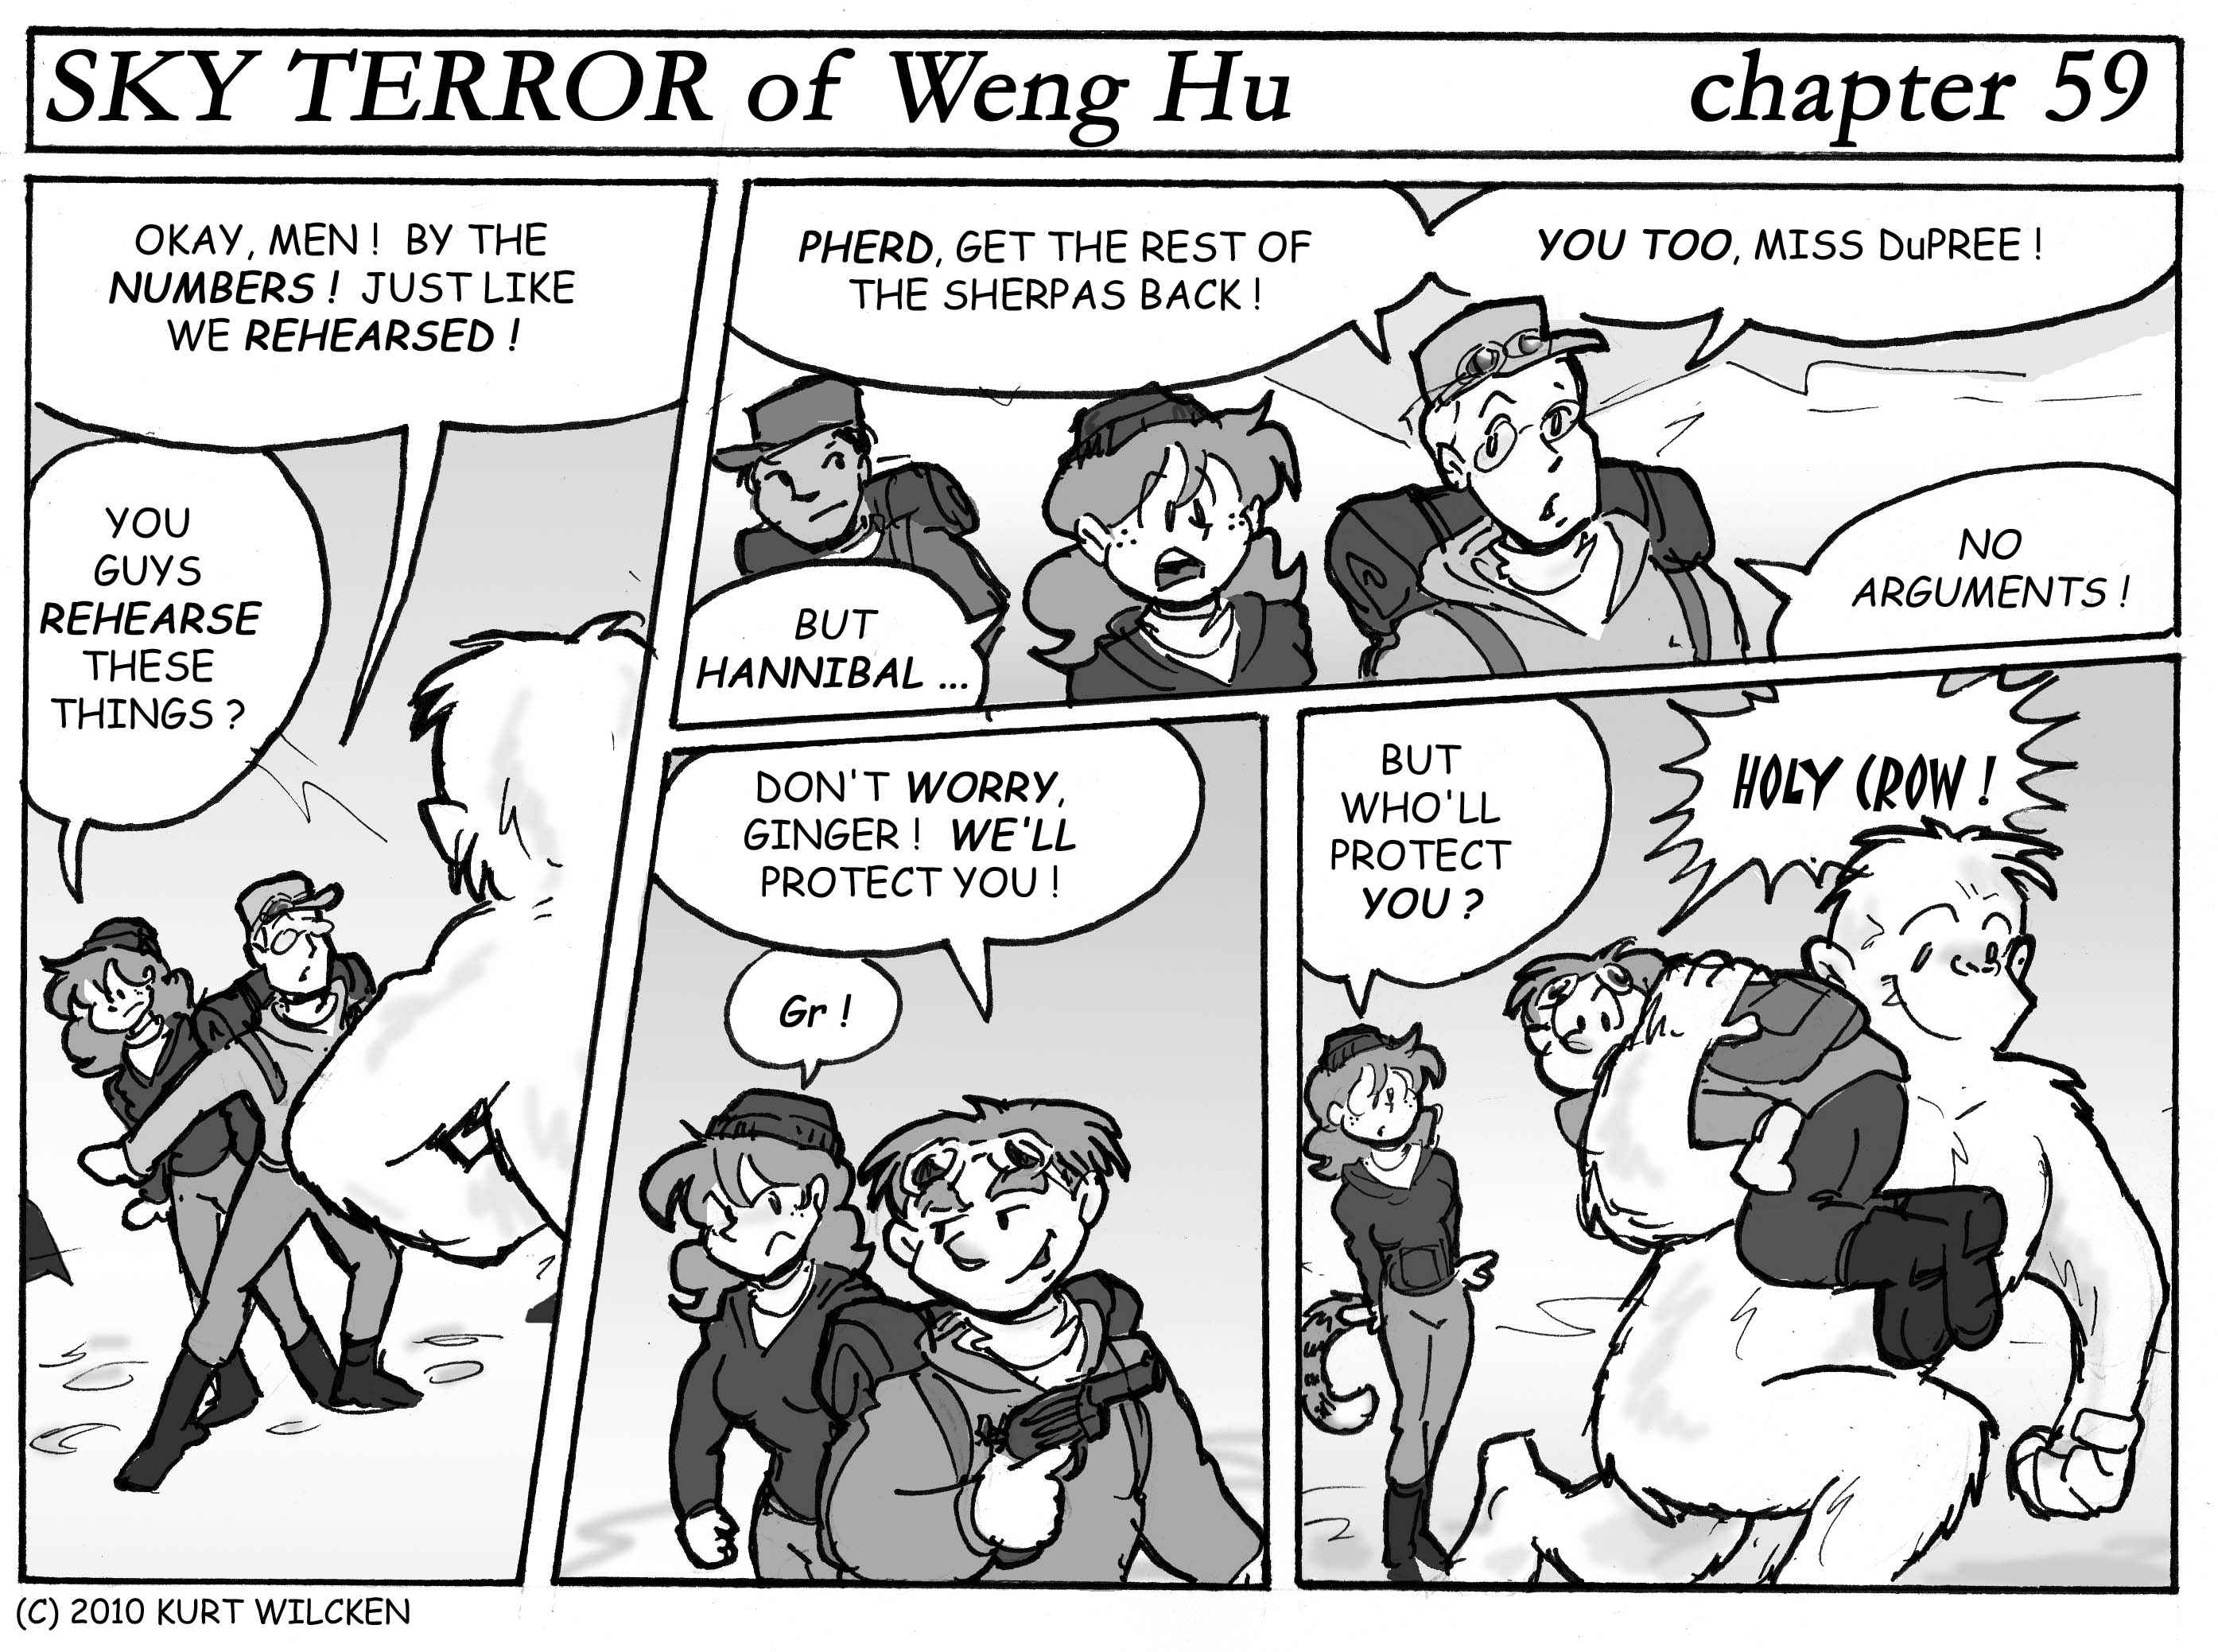 SKY TERROR of Weng Hu:  Chapter 59 — The Yeti Attacks !